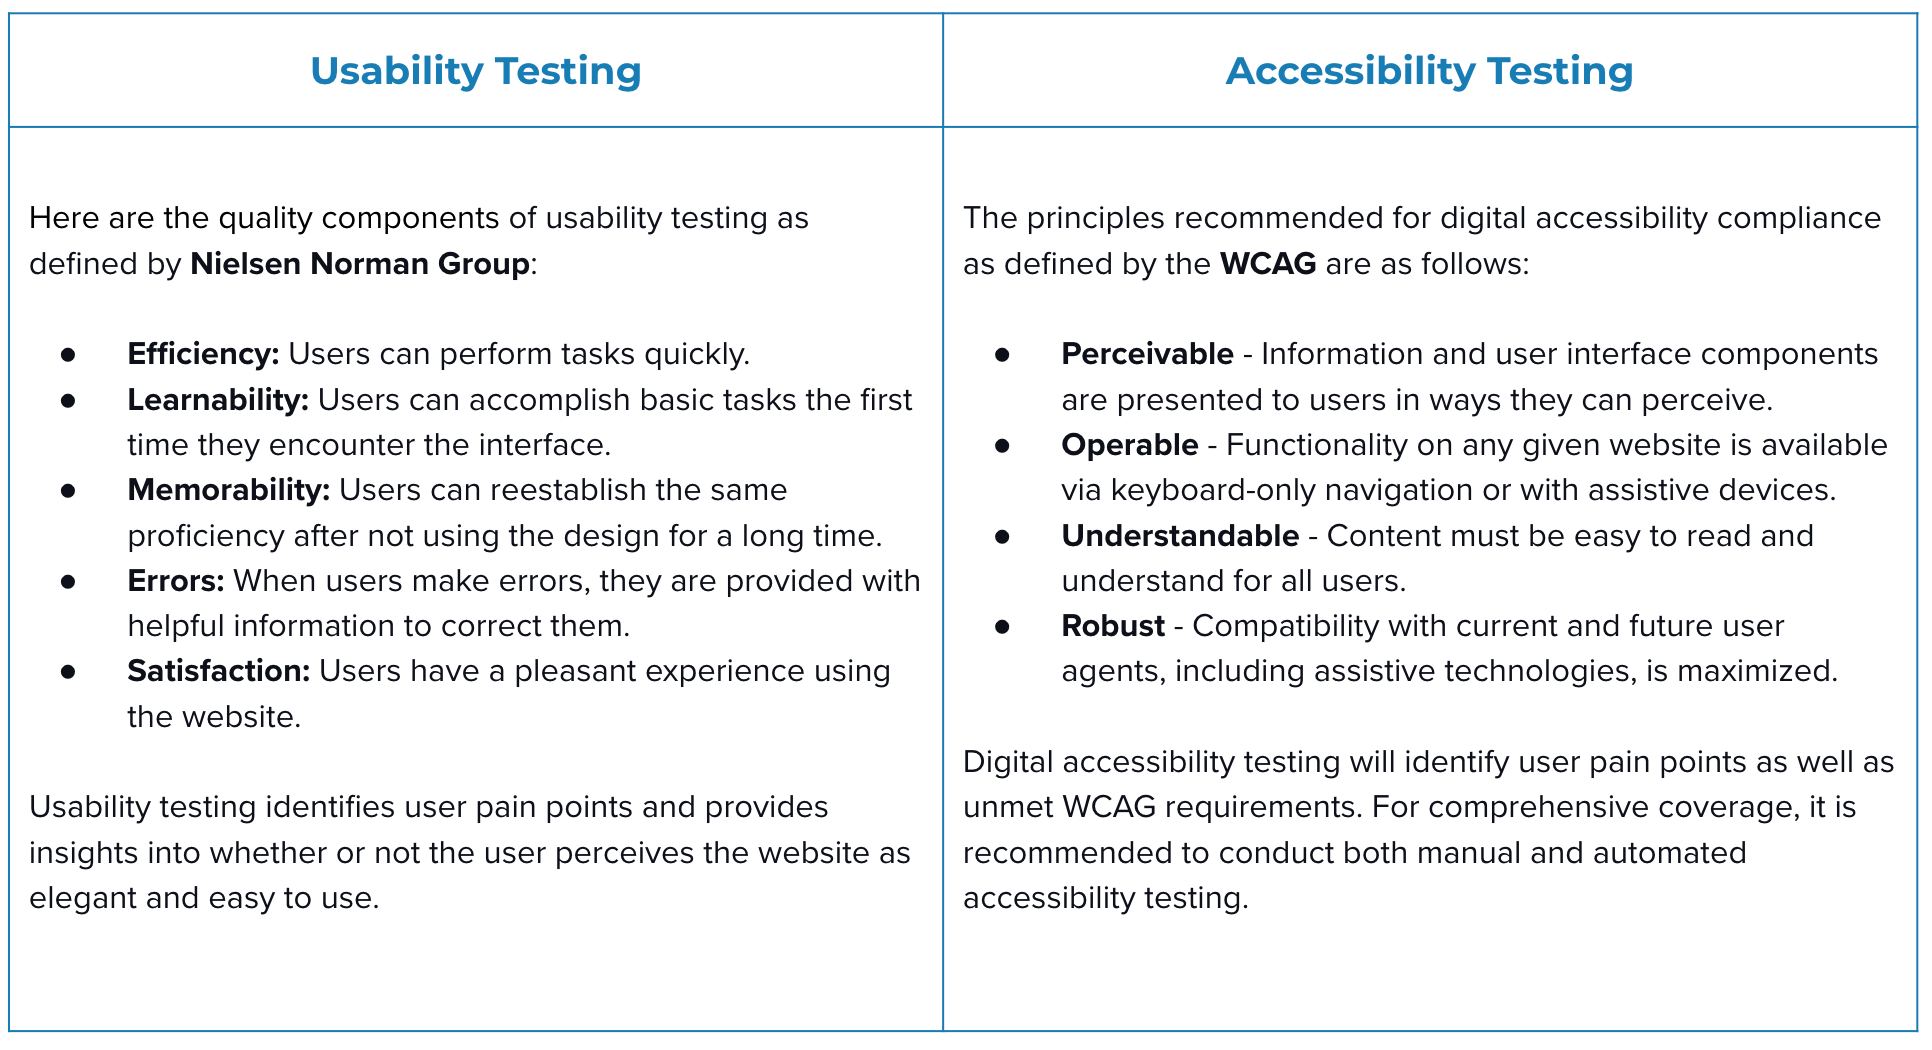 Usability and Accessibility Testing